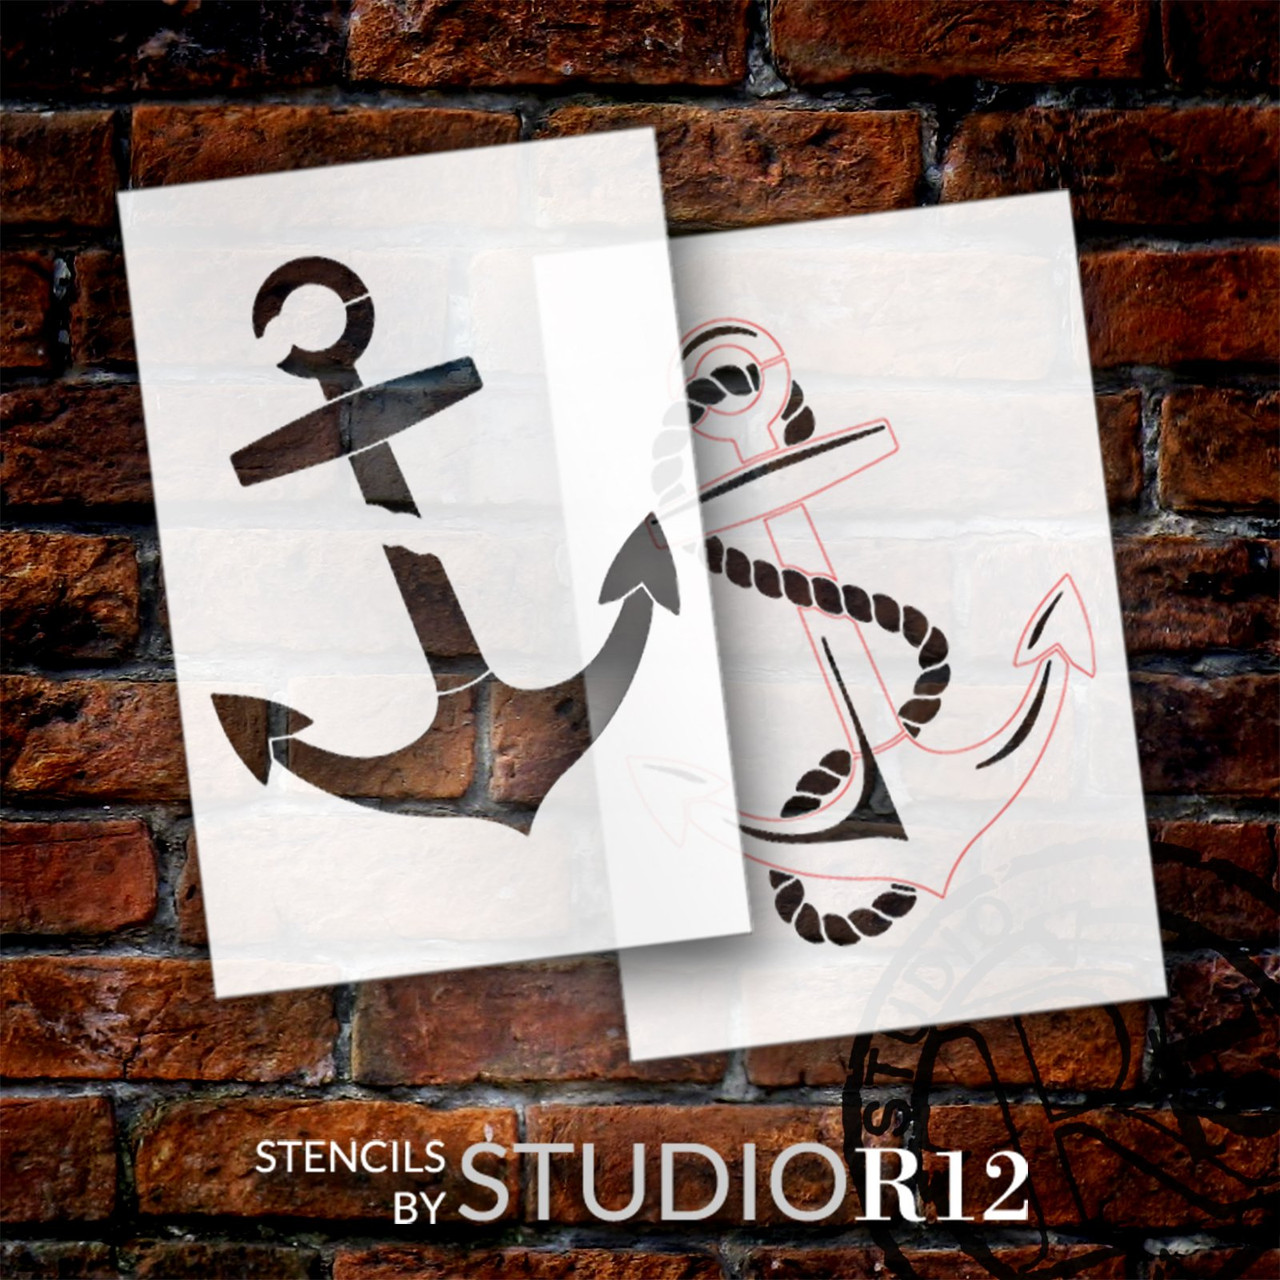 2-Part Anchor Stencil Stencil by StudioR12 - Select Size - USA Made - Craft DIY Nautical Beach Home Decor | Paint Ocean Themed Wood Sign | Reusable Mylar Template